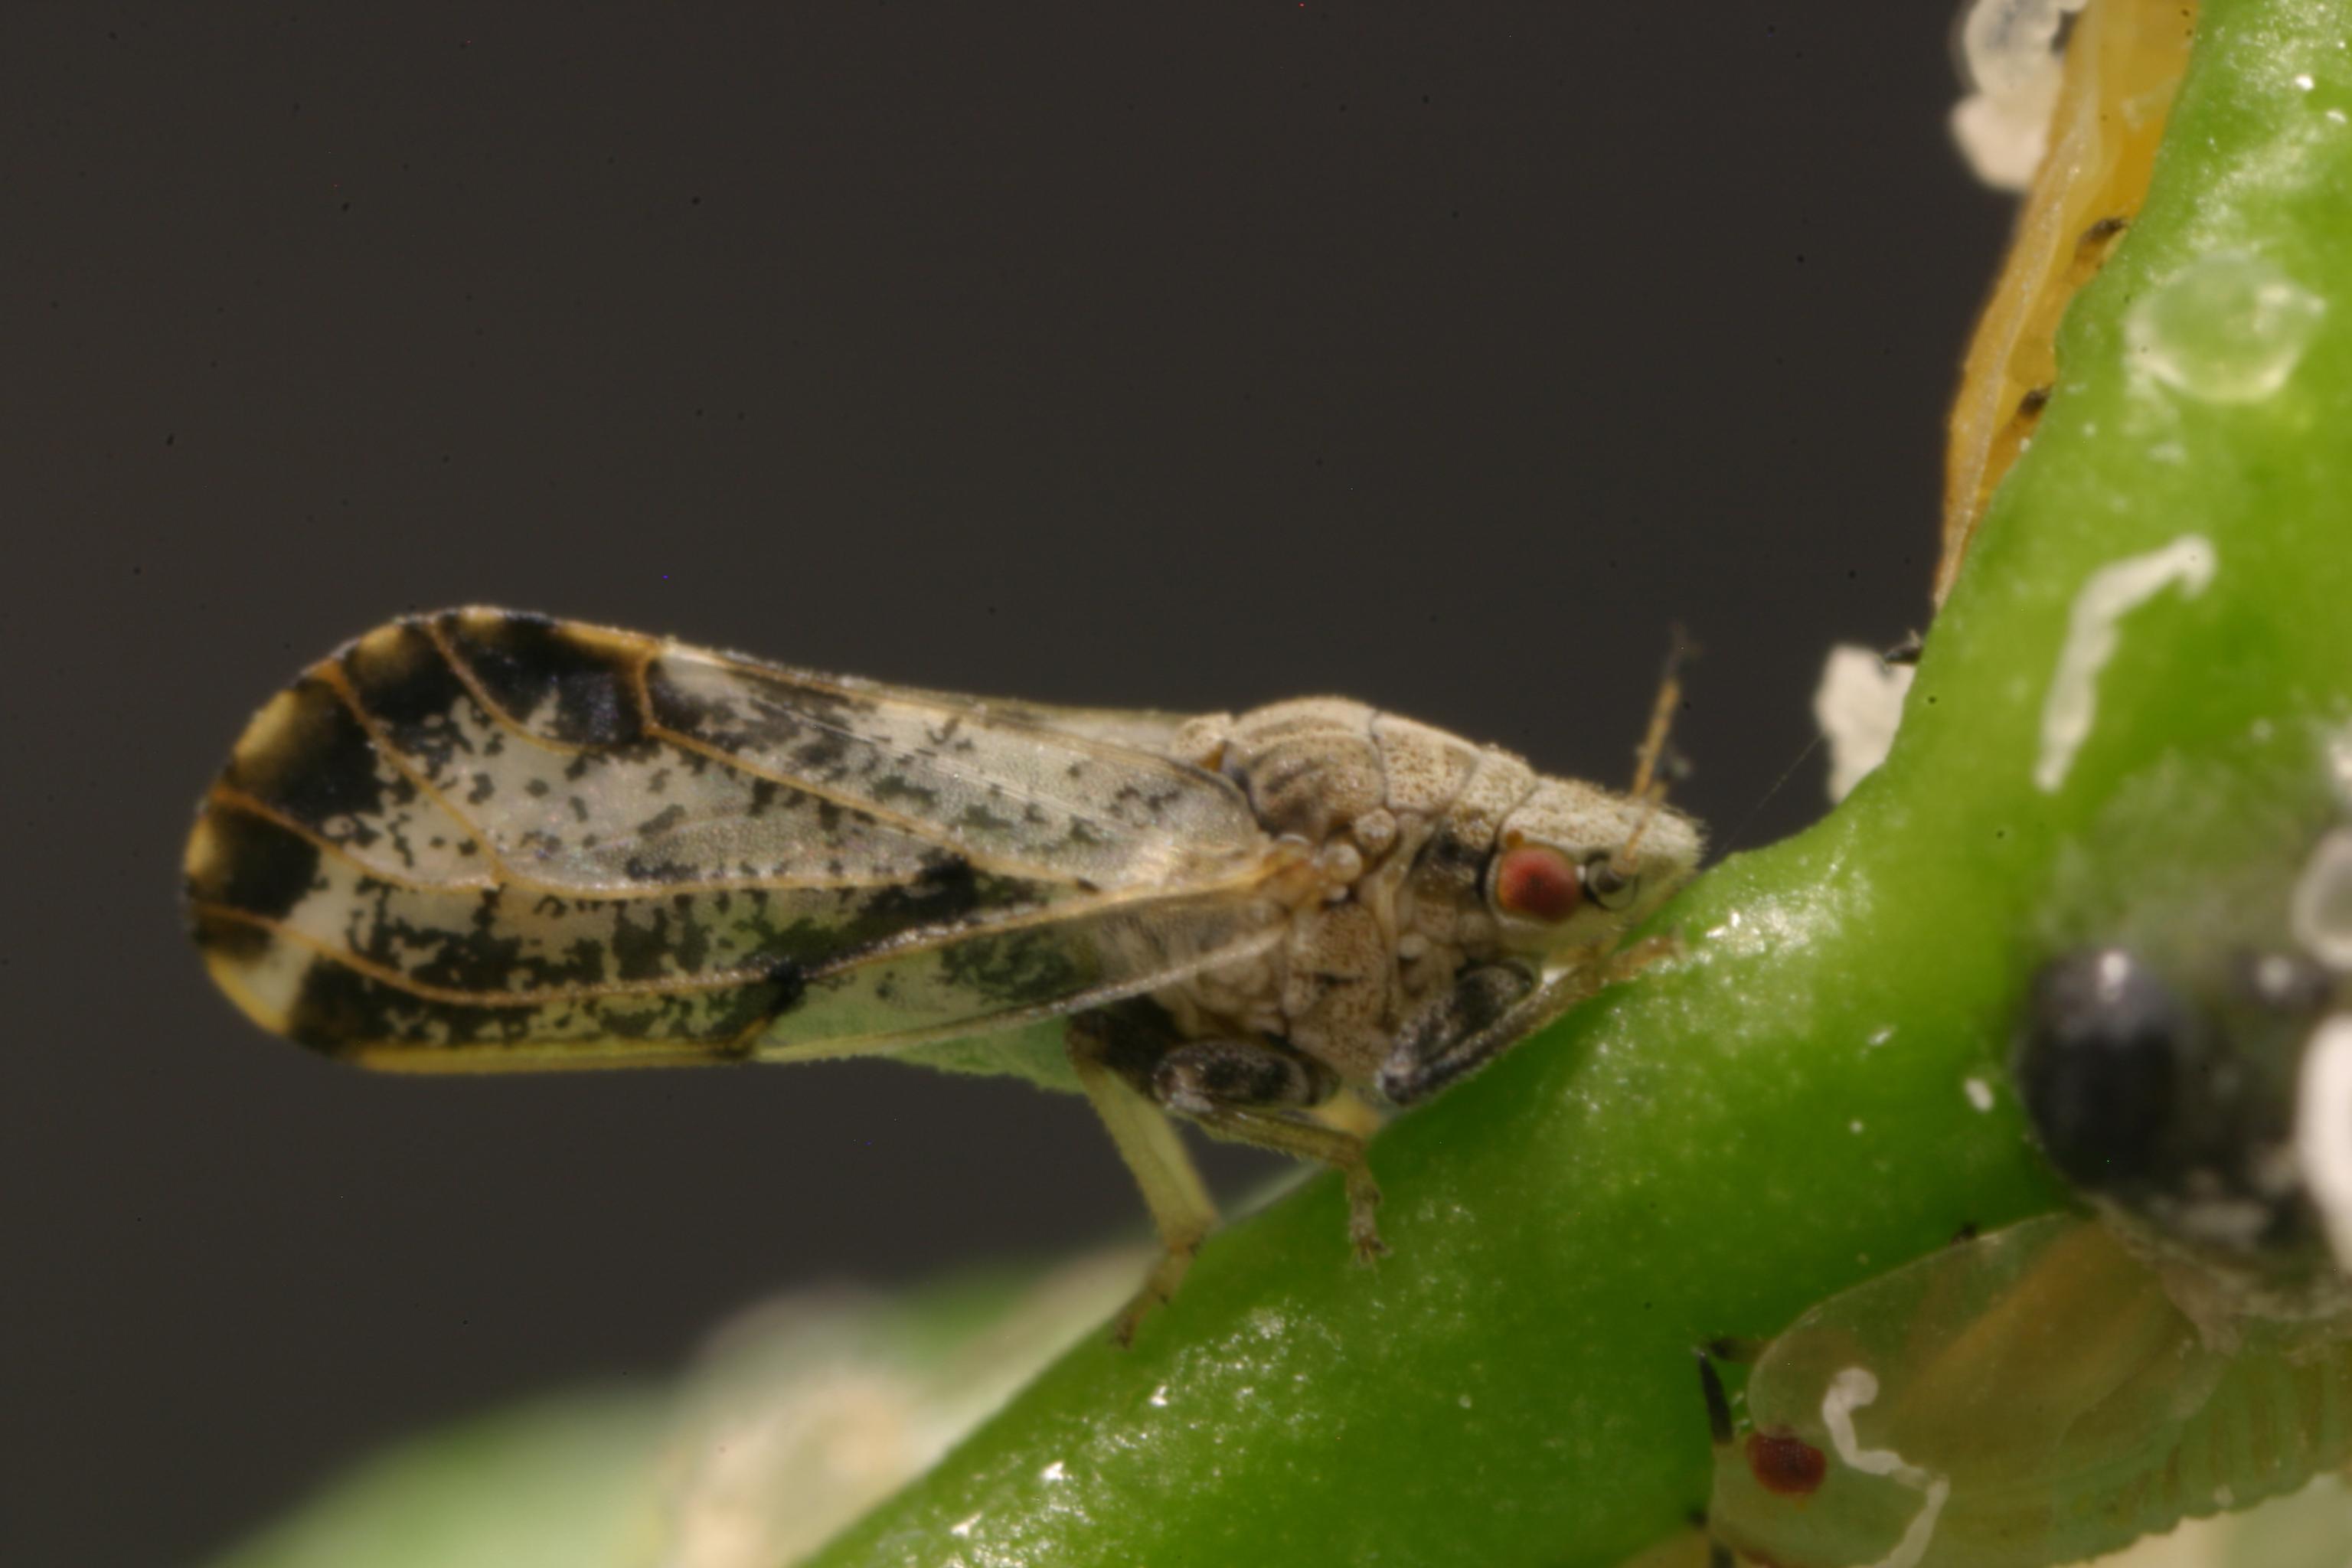 An adult Asian citrus psyllid, and a nymph underneath the shoot.